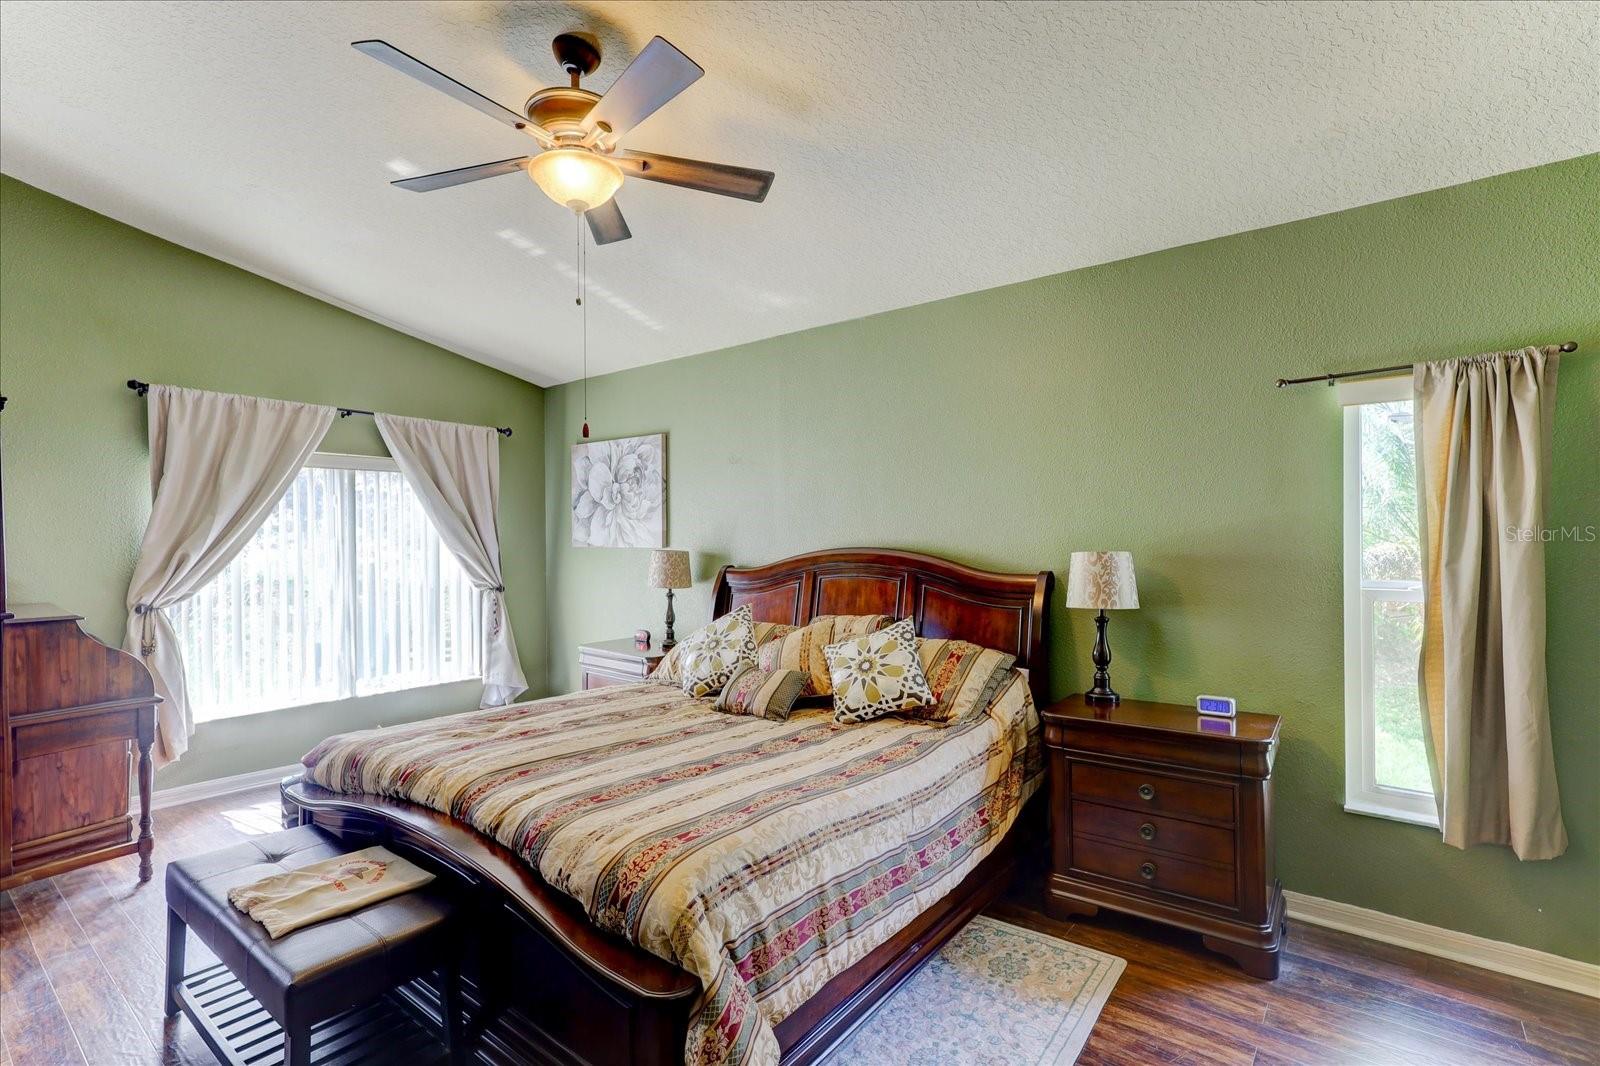 Master Bedroom with Ceiling Fan